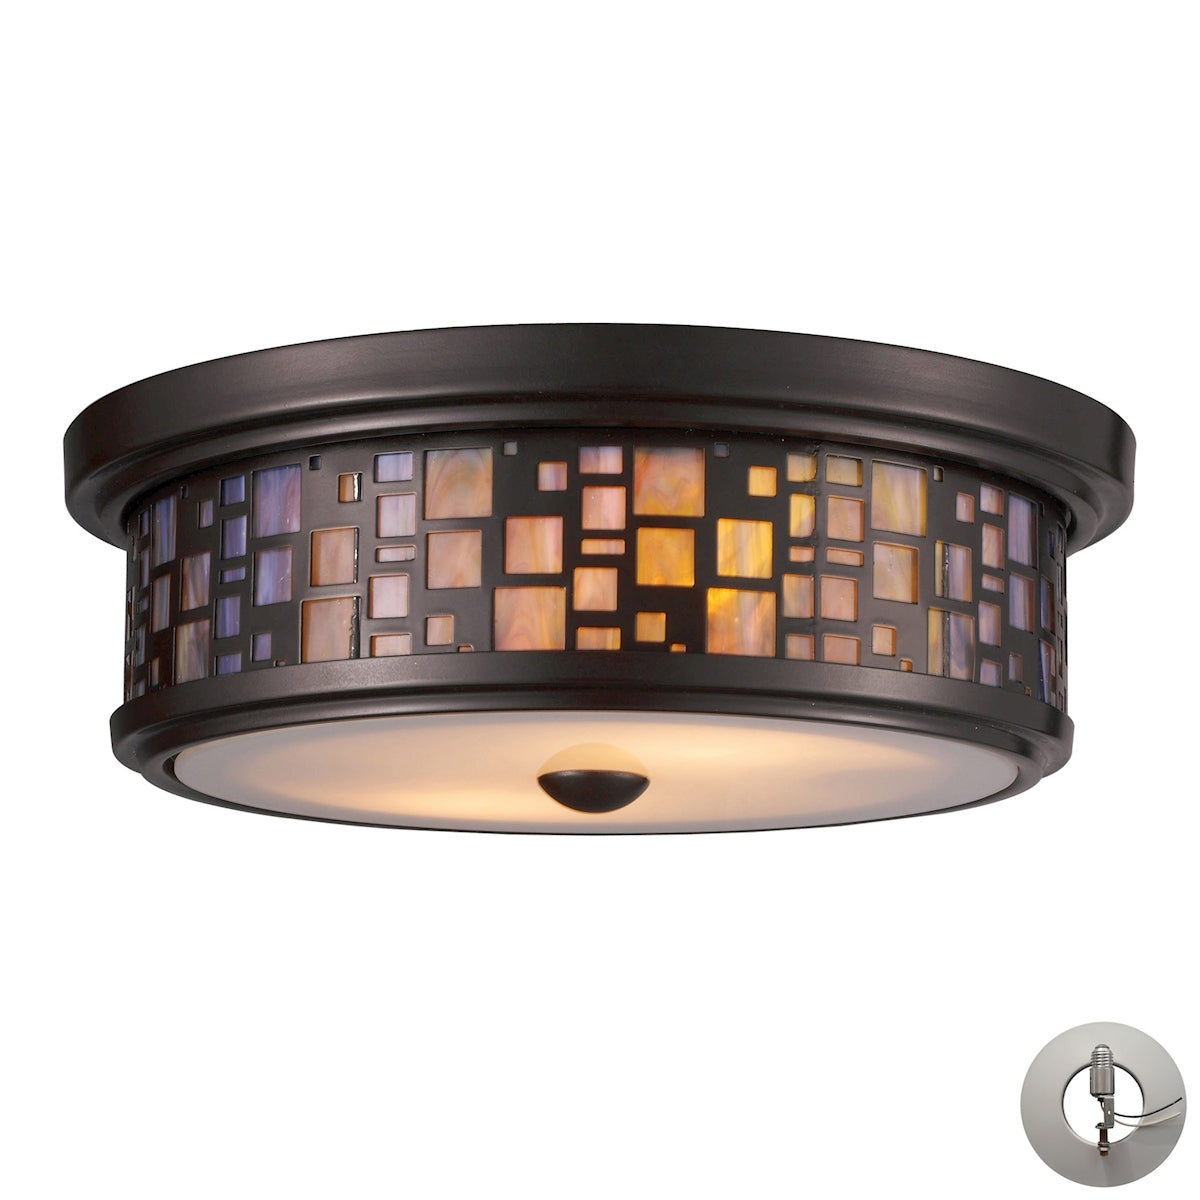 ELK Lighting 70027-2-LA Tiffany 2-Light Flush Mount in Oiled Bronze with Mosaic Tea-stained Glass - Includes Adapter Kit